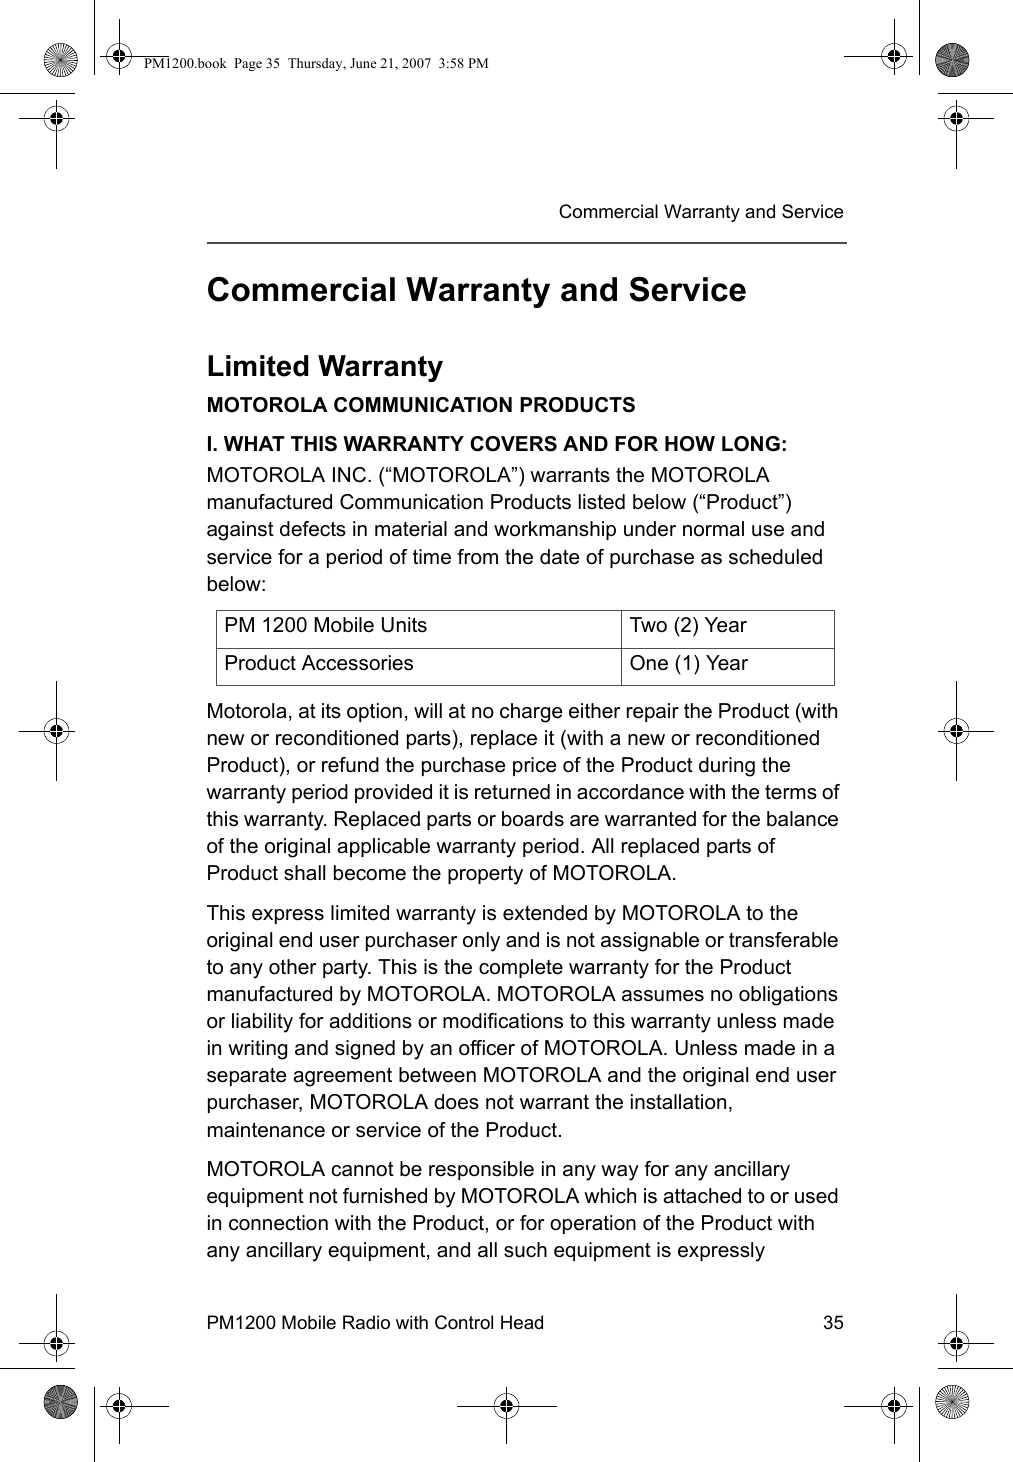 PM1200 Mobile Radio with Control Head 35Commercial Warranty and ServiceCommercial Warranty and ServiceLimited WarrantyMOTOROLA COMMUNICATION PRODUCTSI. WHAT THIS WARRANTY COVERS AND FOR HOW LONG:MOTOROLA INC. (“MOTOROLA”) warrants the MOTOROLA manufactured Communication Products listed below (“Product”) against defects in material and workmanship under normal use and service for a period of time from the date of purchase as scheduled below:Motorola, at its option, will at no charge either repair the Product (with new or reconditioned parts), replace it (with a new or reconditioned Product), or refund the purchase price of the Product during the warranty period provided it is returned in accordance with the terms of this warranty. Replaced parts or boards are warranted for the balance of the original applicable warranty period. All replaced parts of Product shall become the property of MOTOROLA.This express limited warranty is extended by MOTOROLA to the original end user purchaser only and is not assignable or transferable to any other party. This is the complete warranty for the Product manufactured by MOTOROLA. MOTOROLA assumes no obligations or liability for additions or modifications to this warranty unless made in writing and signed by an officer of MOTOROLA. Unless made in a separate agreement between MOTOROLA and the original end user purchaser, MOTOROLA does not warrant the installation, maintenance or service of the Product.MOTOROLA cannot be responsible in any way for any ancillary equipment not furnished by MOTOROLA which is attached to or used in connection with the Product, or for operation of the Product with any ancillary equipment, and all such equipment is expressly PM 1200 Mobile Units Two (2) YearProduct Accessories One (1) YearPM1200.book  Page 35  Thursday, June 21, 2007  3:58 PM